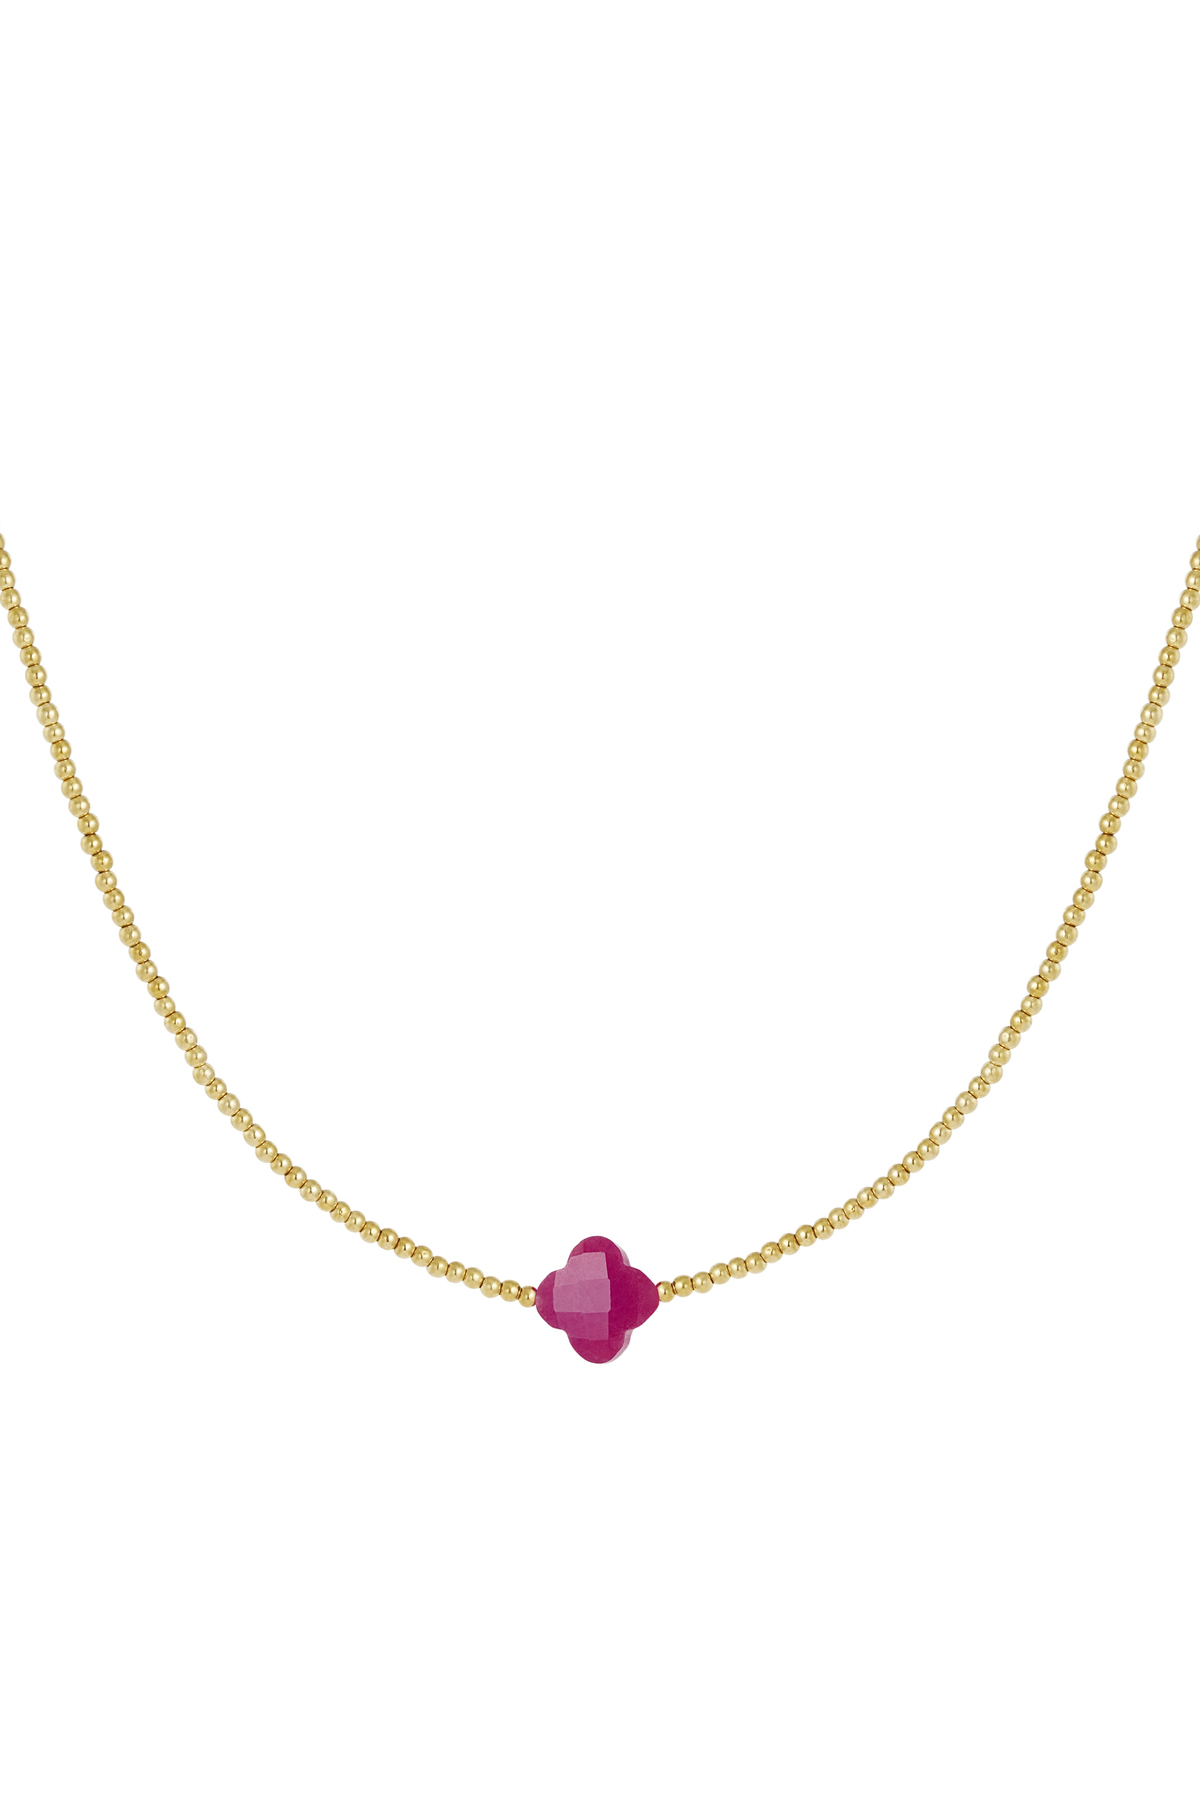 Beaded necklace clover - Natural stones collection Fuchsia Stainless Steel h5 